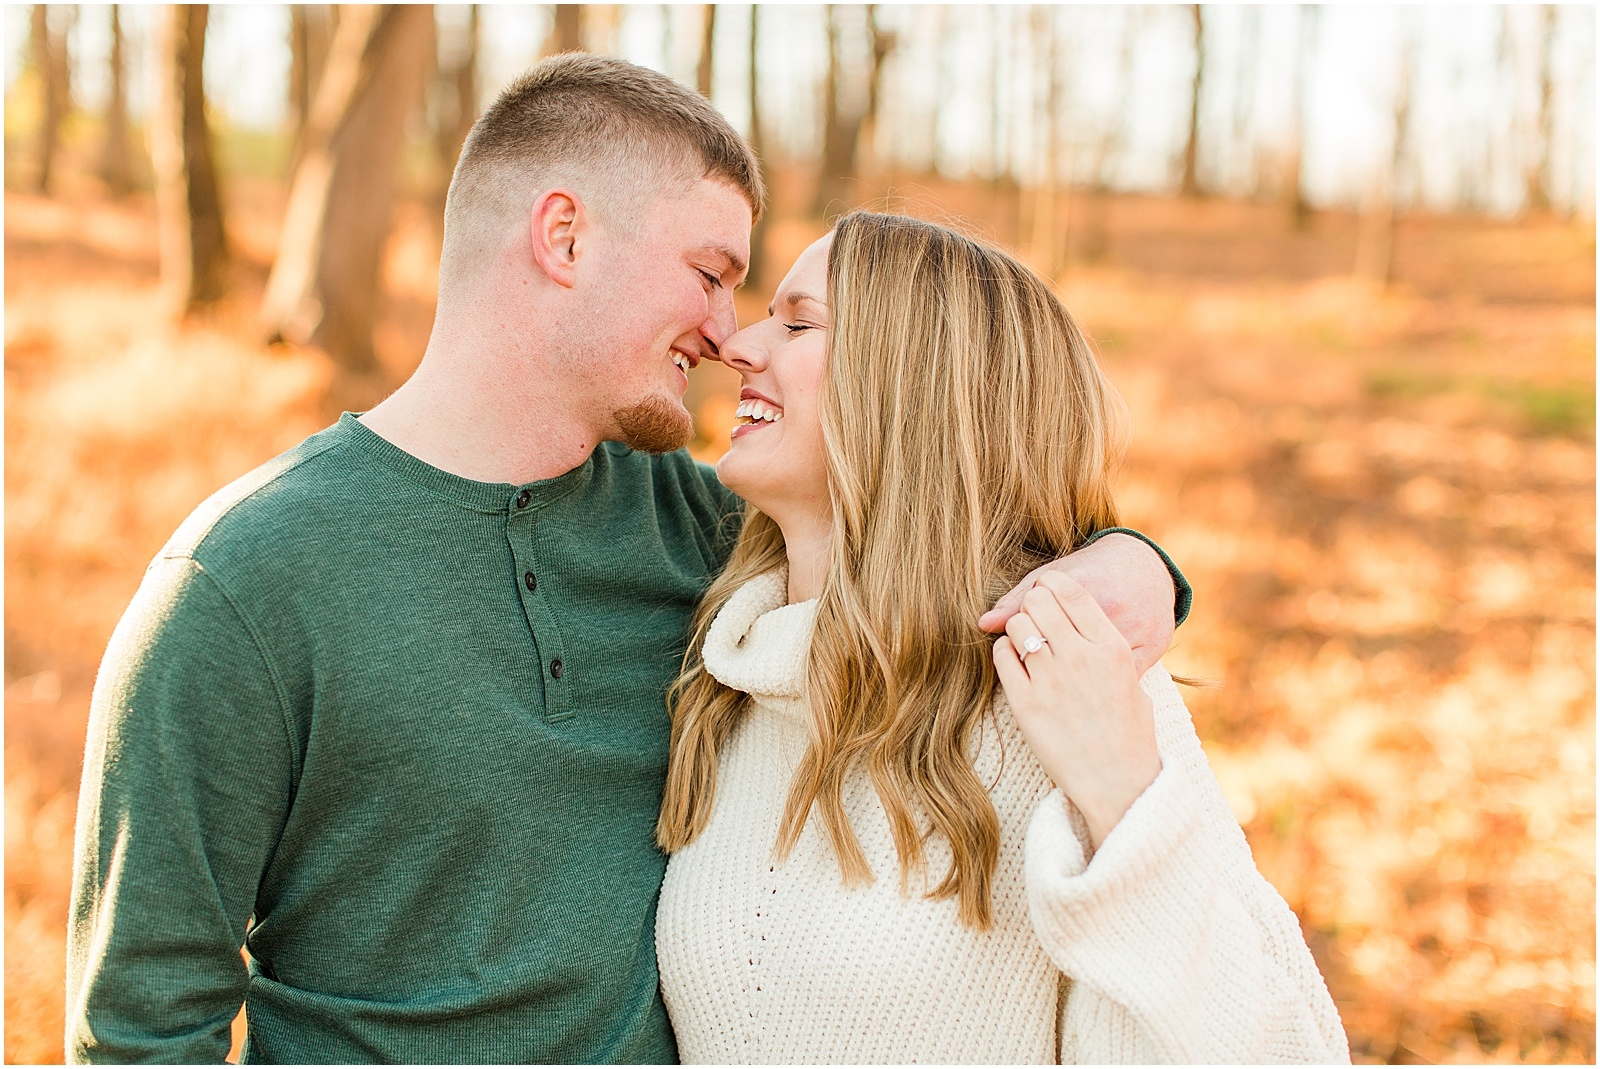 A Fall Southern Indiana Engagement Seesion | Cody and Hannah | Bret and Brandie Photography 025.jpg